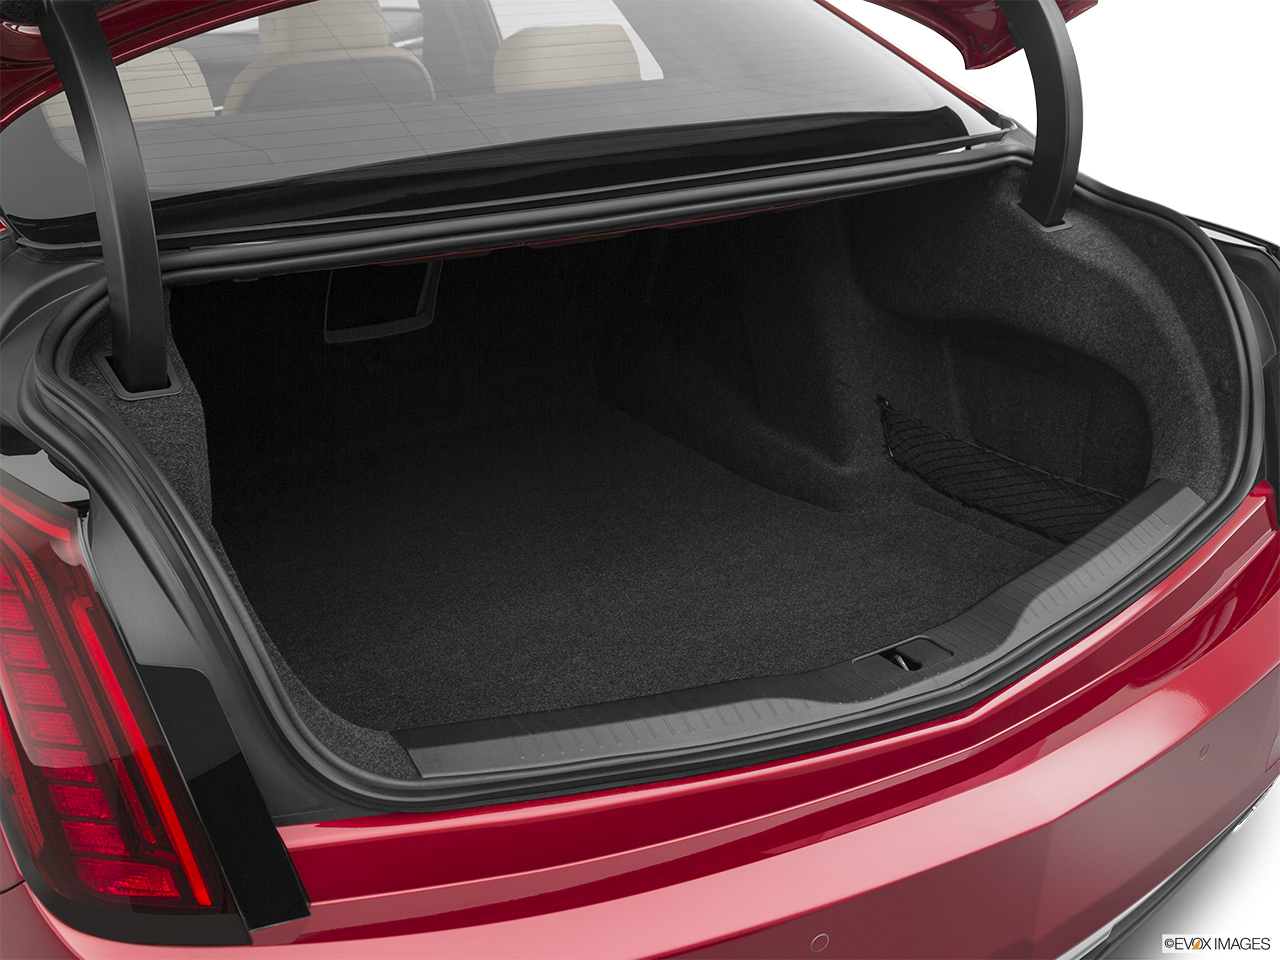 2020 Cadillac CT6 Luxury Trunk open. 